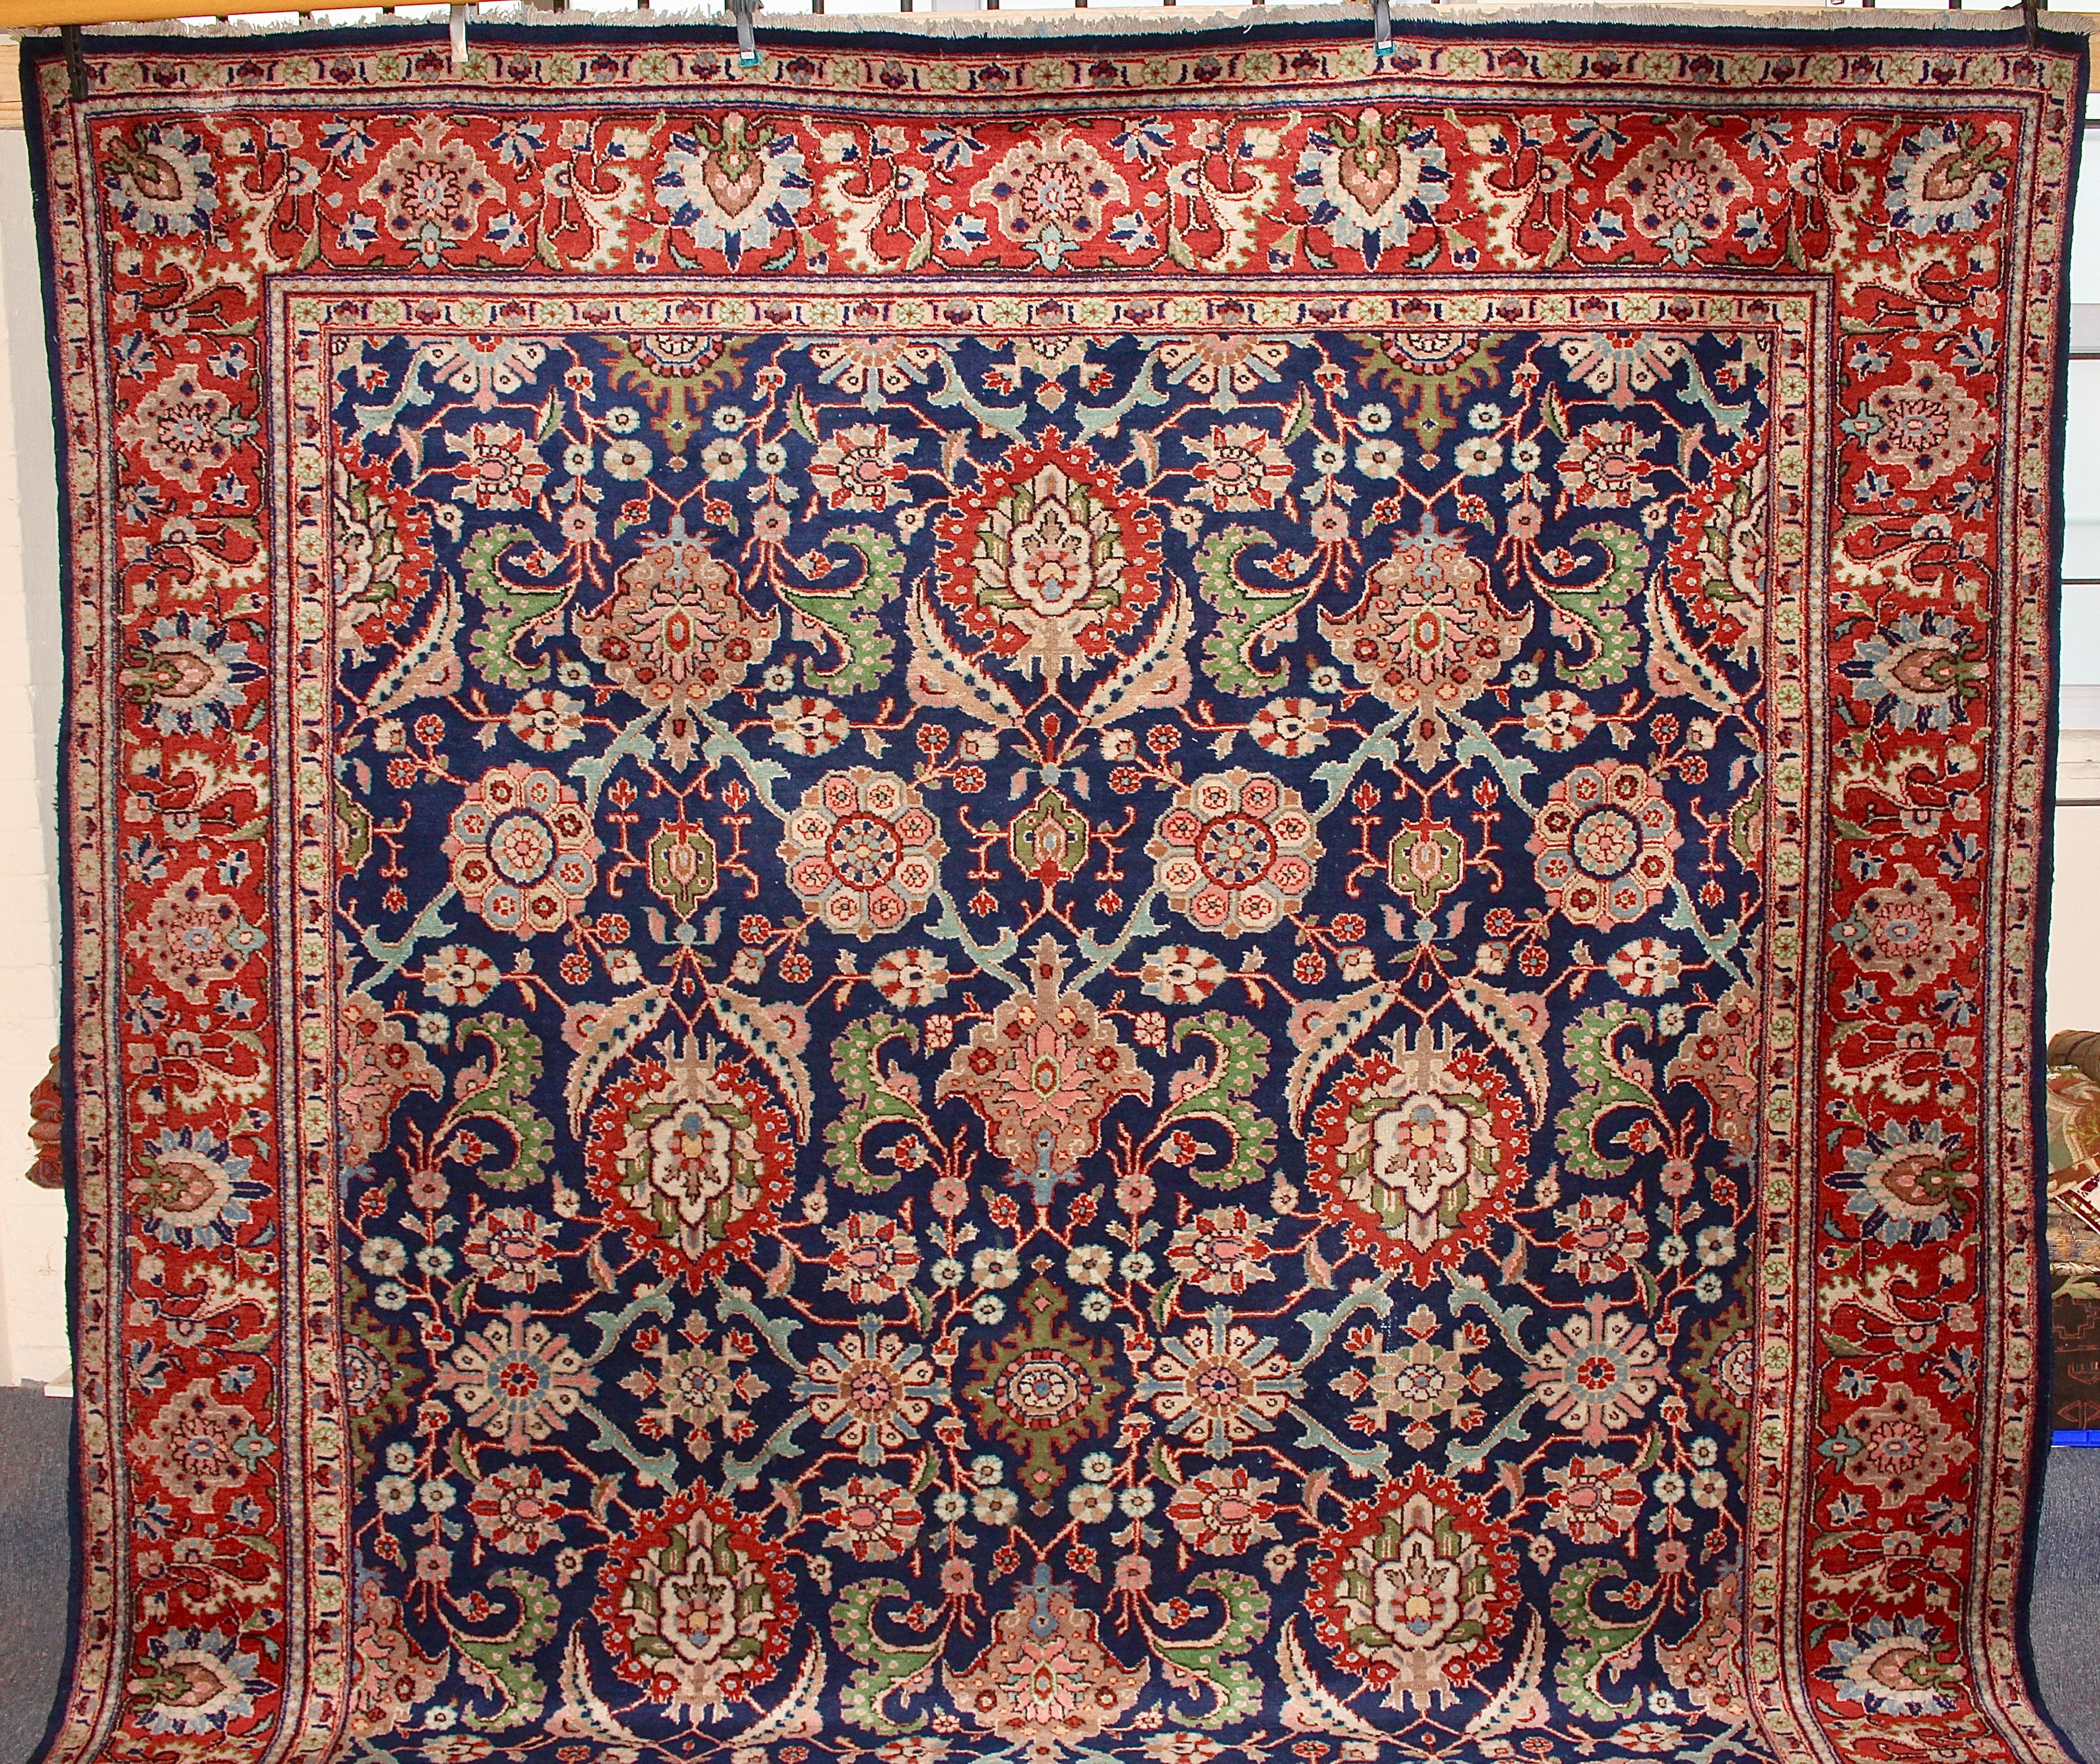 High quality, large antique orient rug. Carpet.

Hand knotted. Strong natural colors. Beautiful pattern.
The carpet is in an age-related condition.

The images are part of the article description.

On request, we clean the carpet